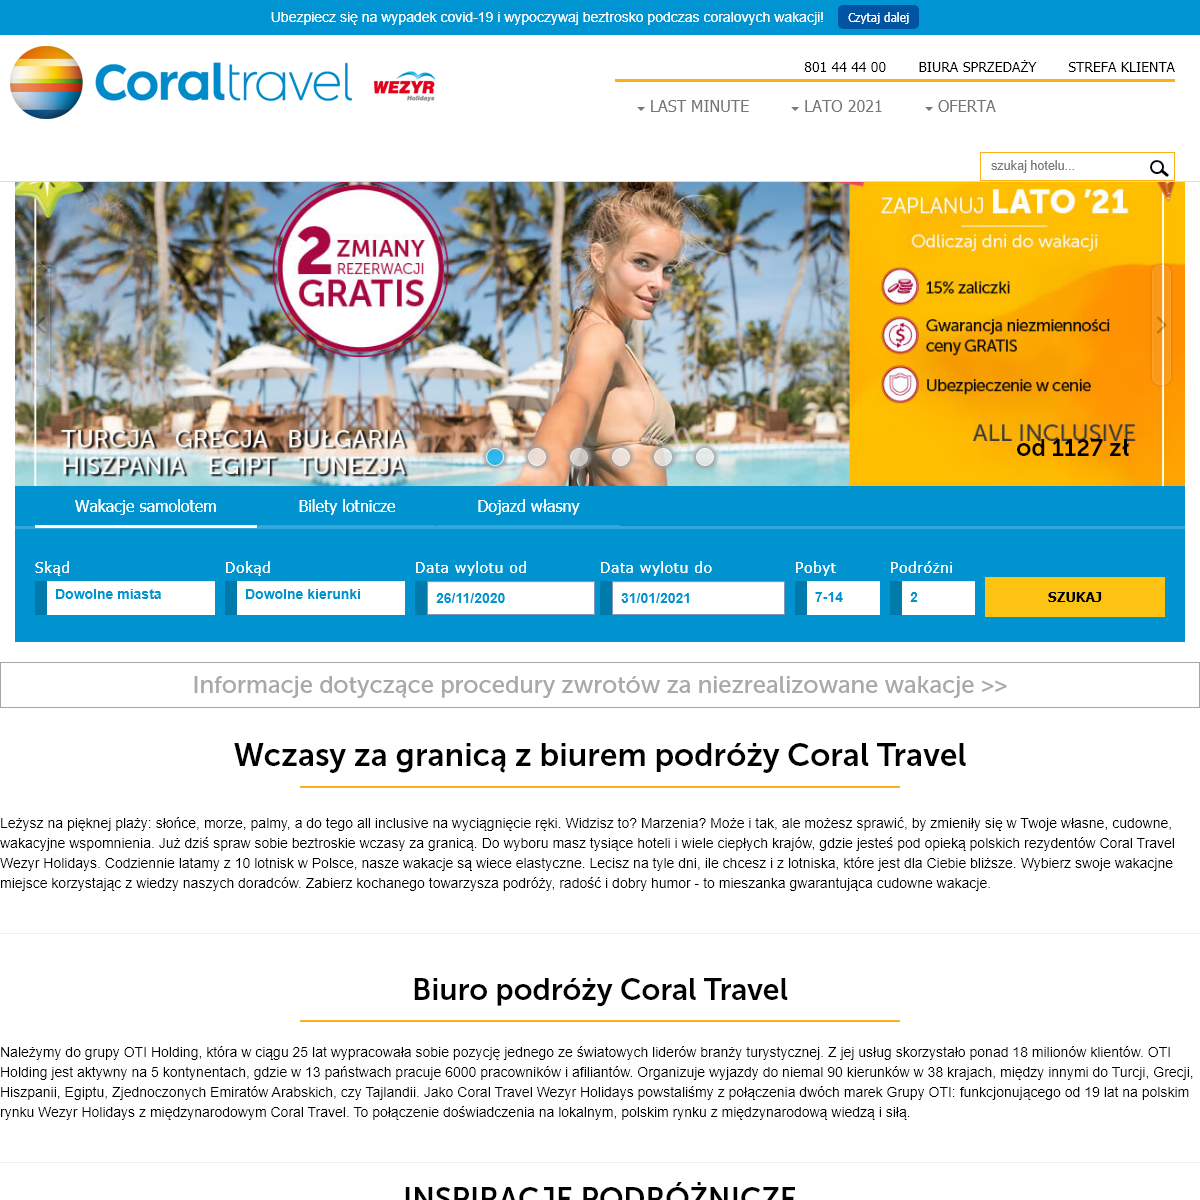 A complete backup of coraltravel.pl